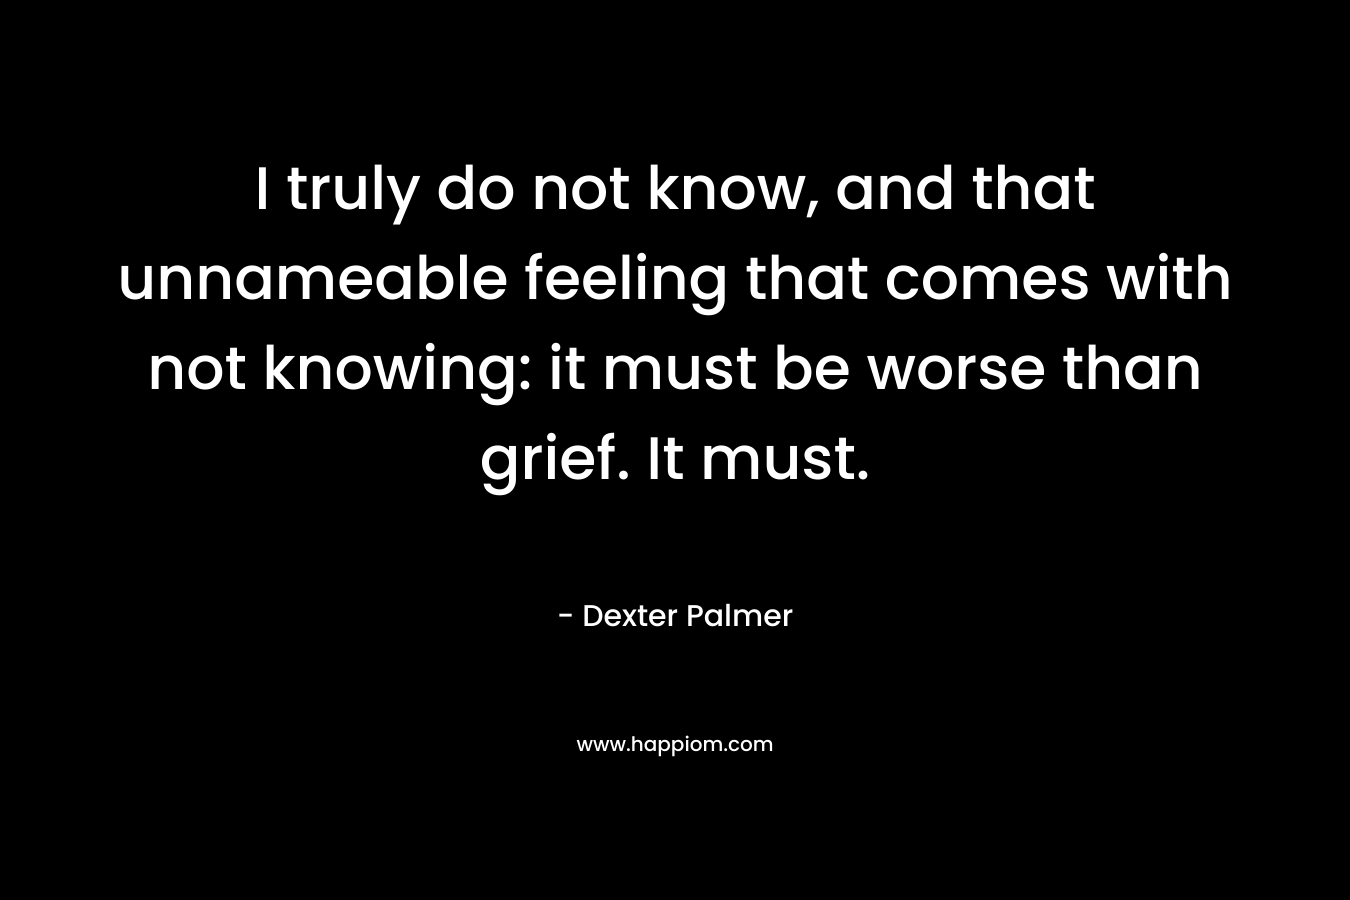 I truly do not know, and that unnameable feeling that comes with not knowing: it must be worse than grief. It must. – Dexter Palmer